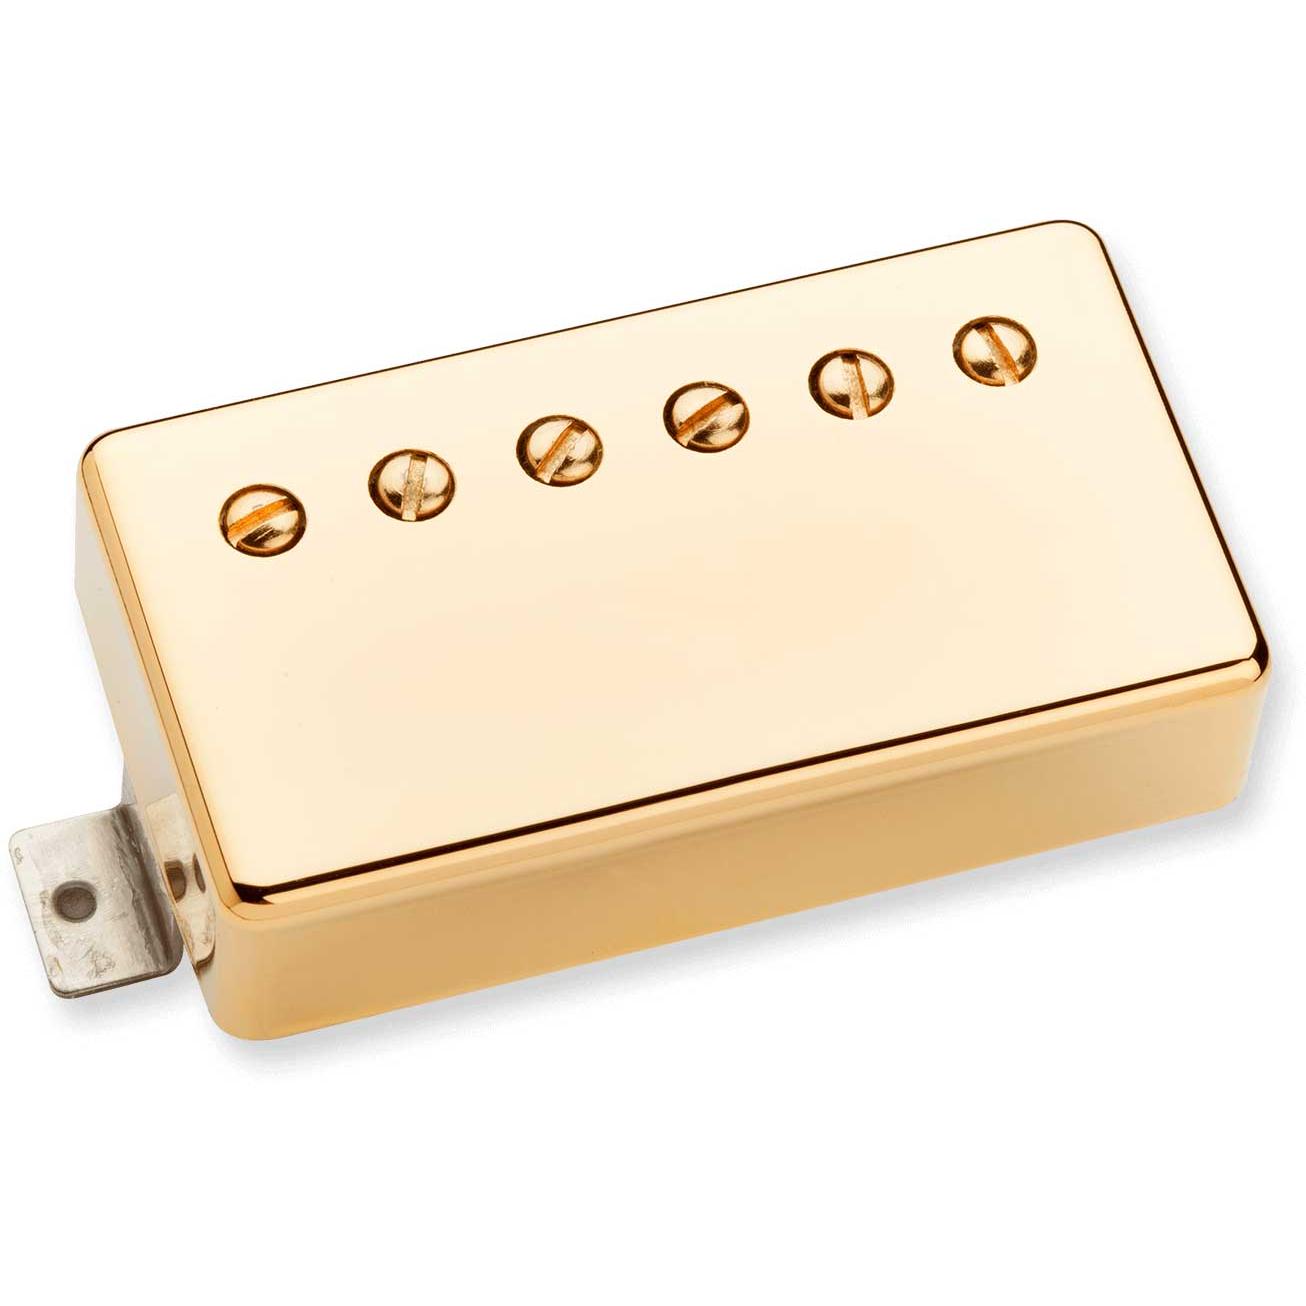 SEYMOUR DUNCAN ITALIA 11601-09GC  GOLD PAF BENEDETTO